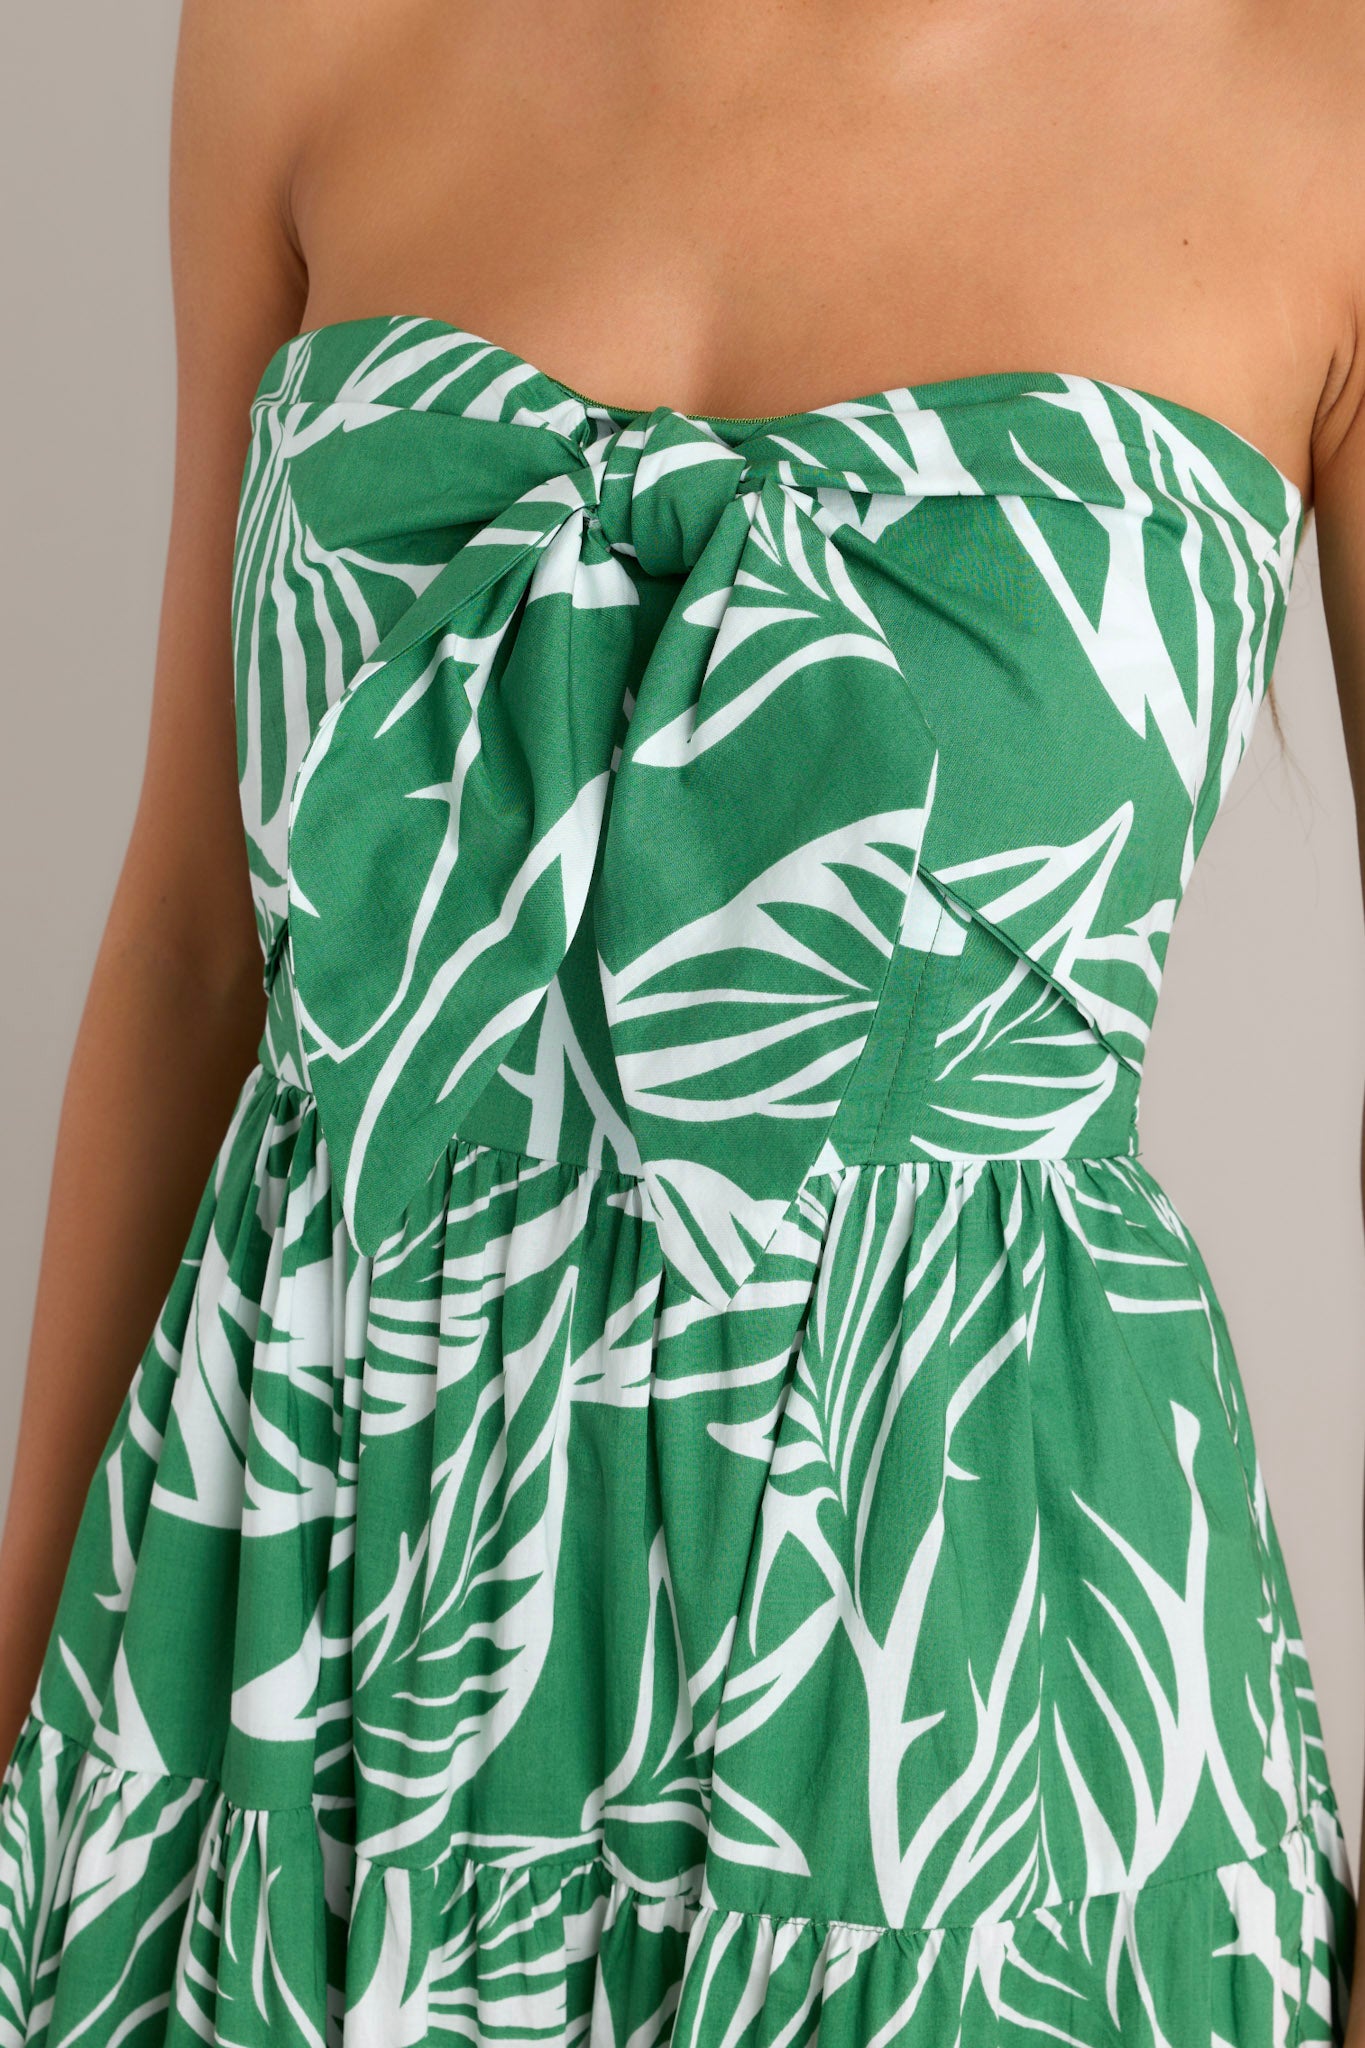 Close-up of the green midi dress showing the boning in the bodice, self-tie feature, and the fully smocked insert in the back.